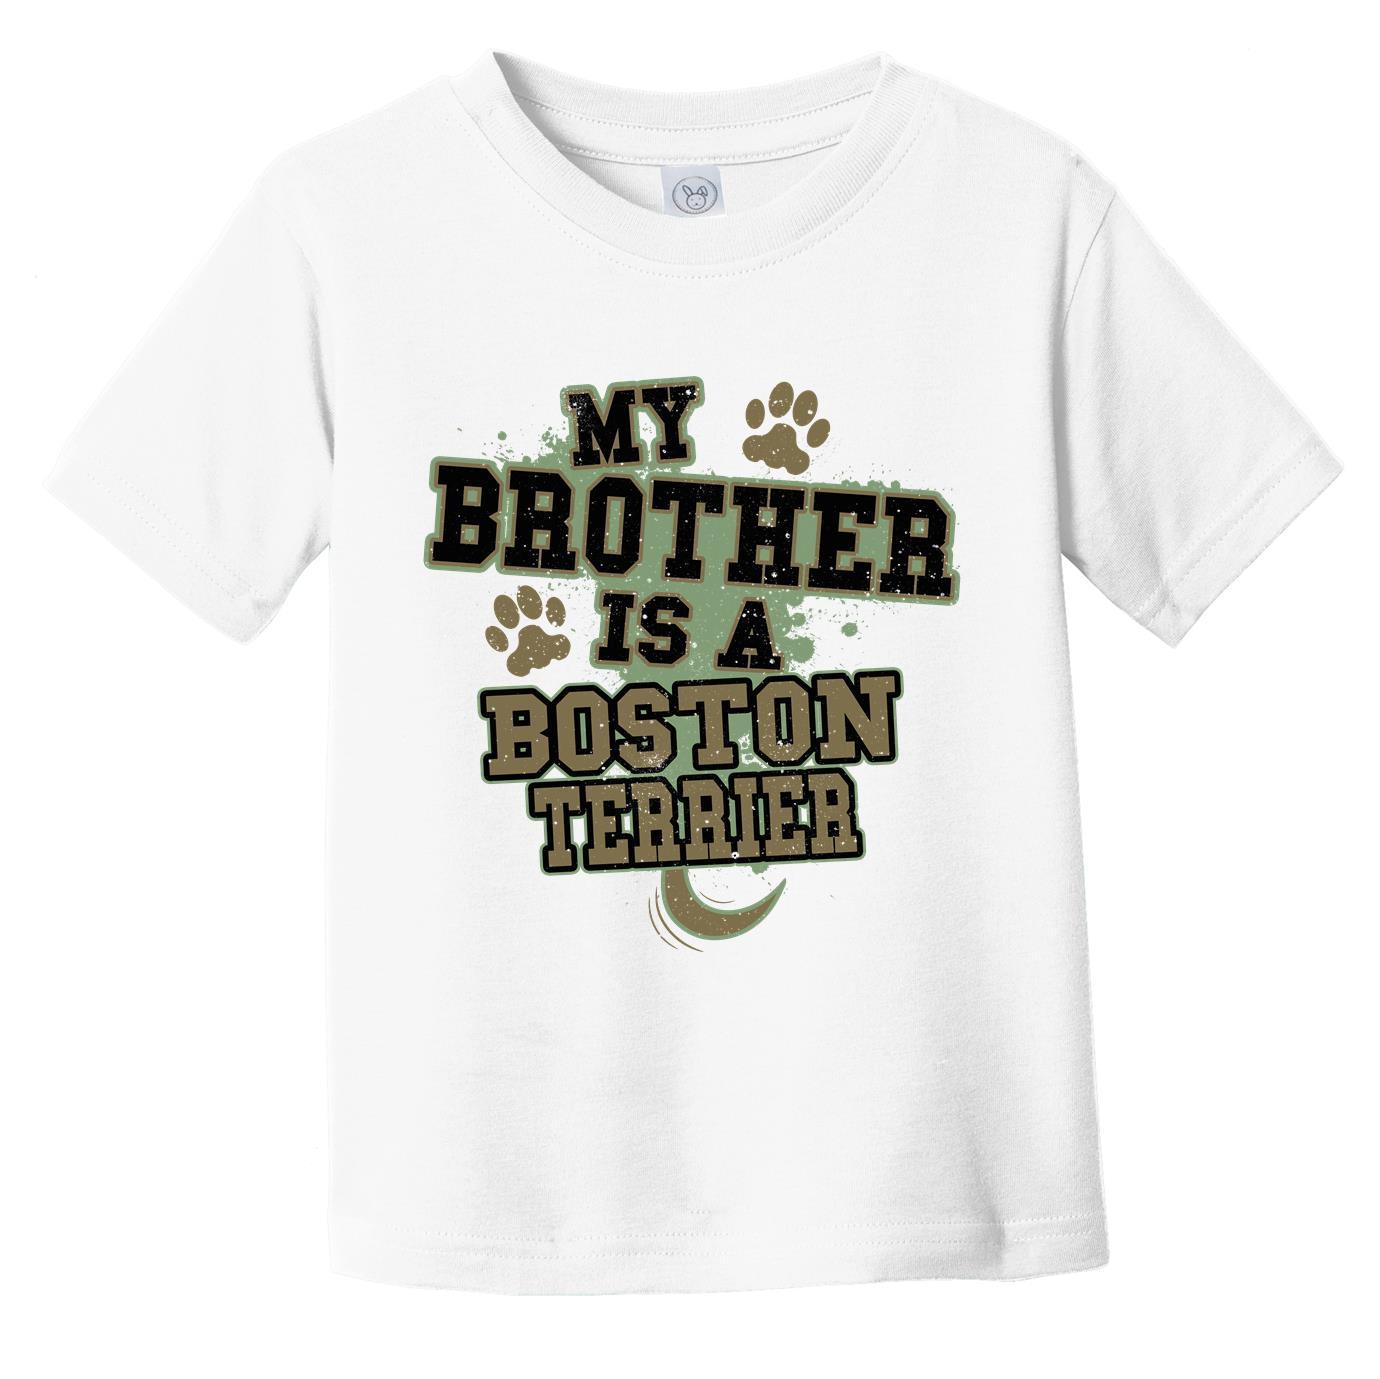 My Brother Is A Boston Terrier Funny Dog Infant Toddler T-Shirt